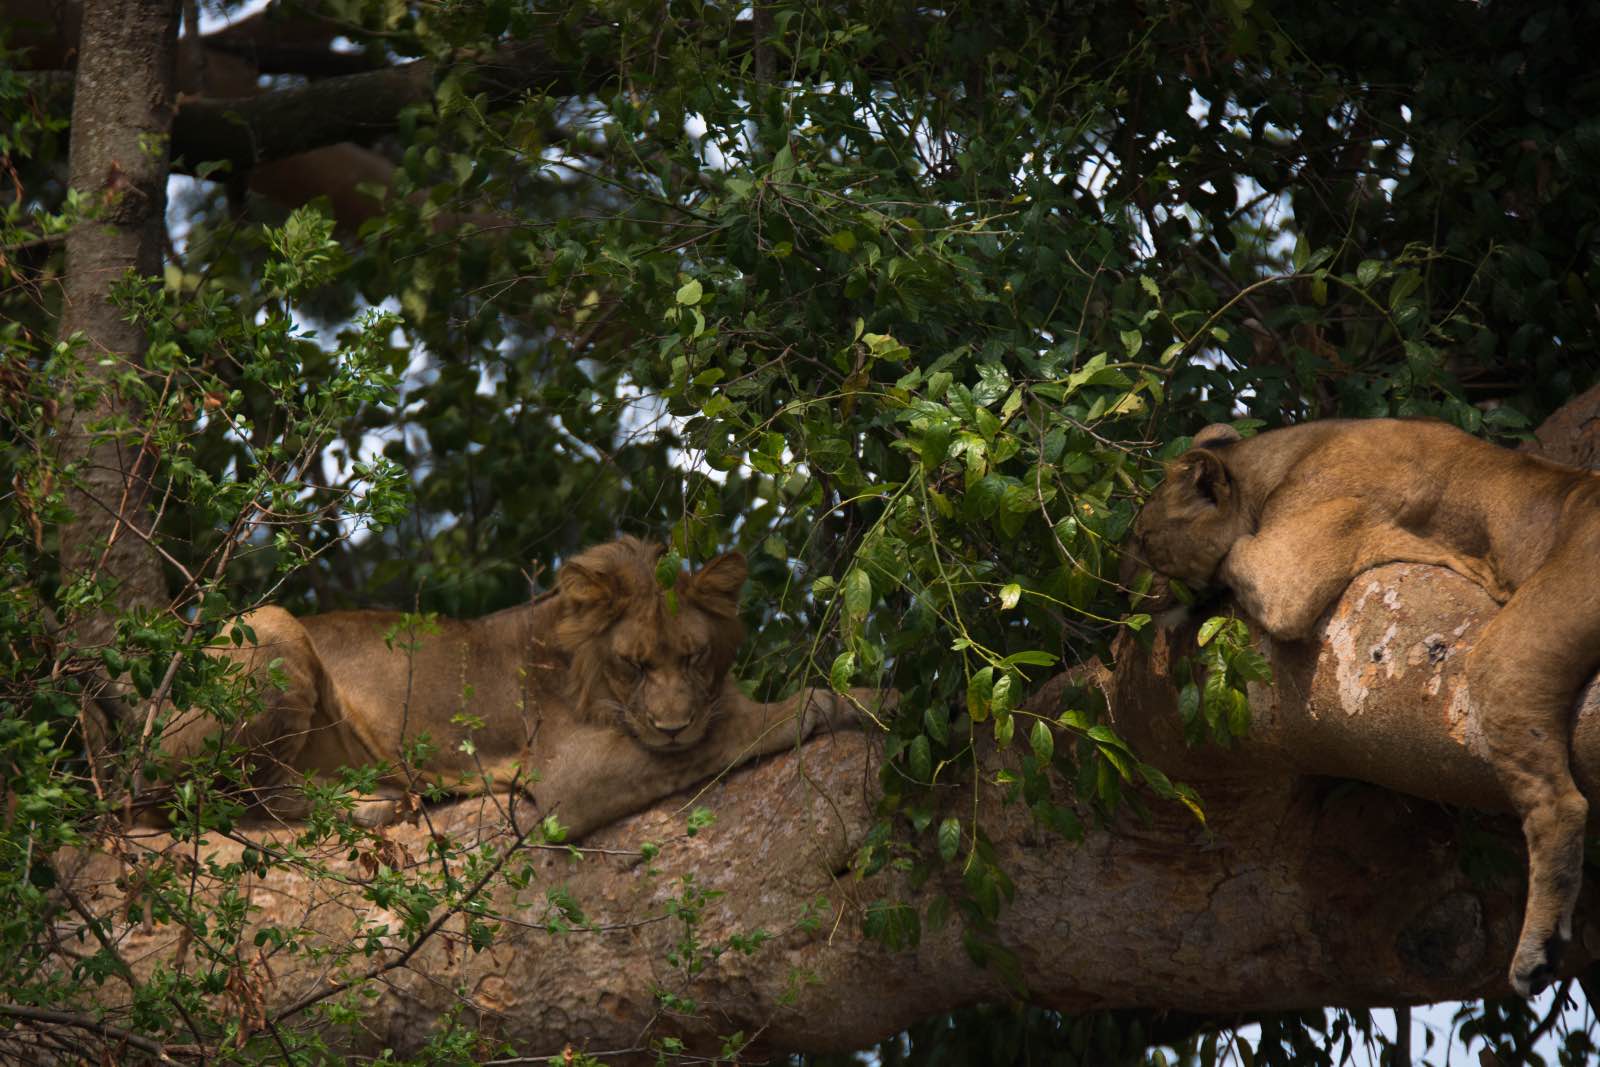 You stand the chance of seeing a pride of lions relaxing in the branches of large fig trees in Uganda